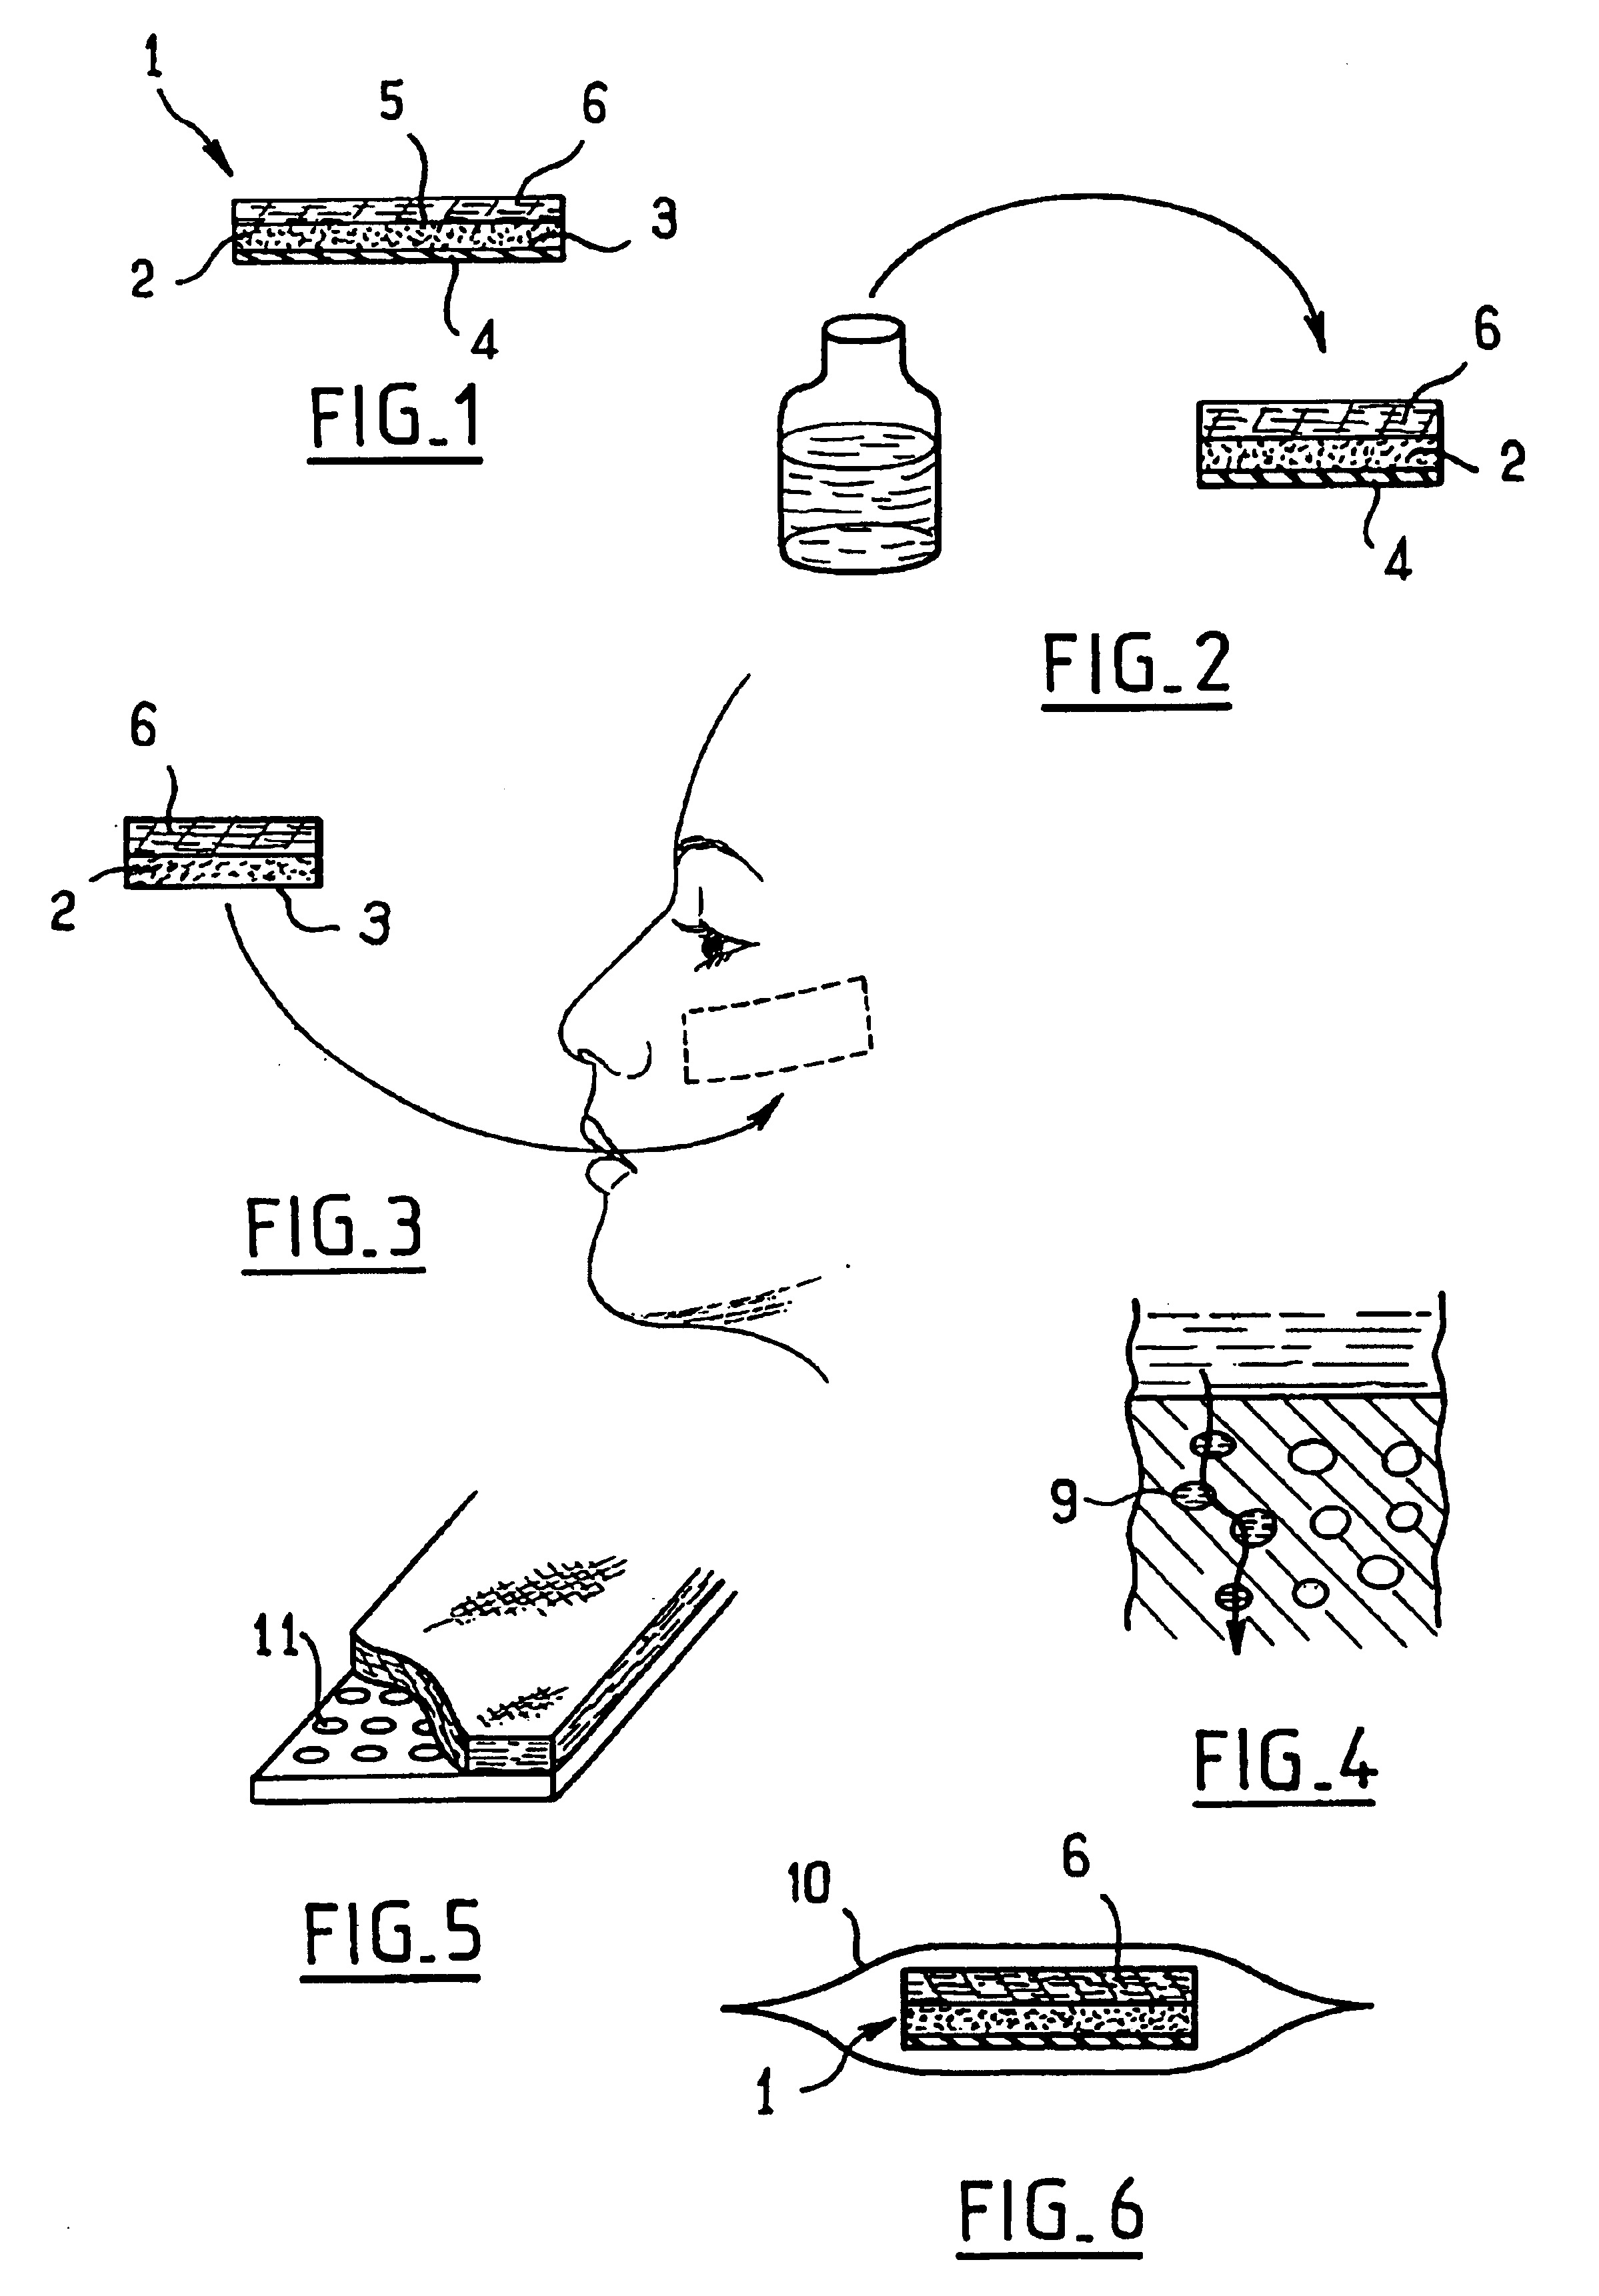 Patch, a kit constituted by a patch and a receptacle and a method